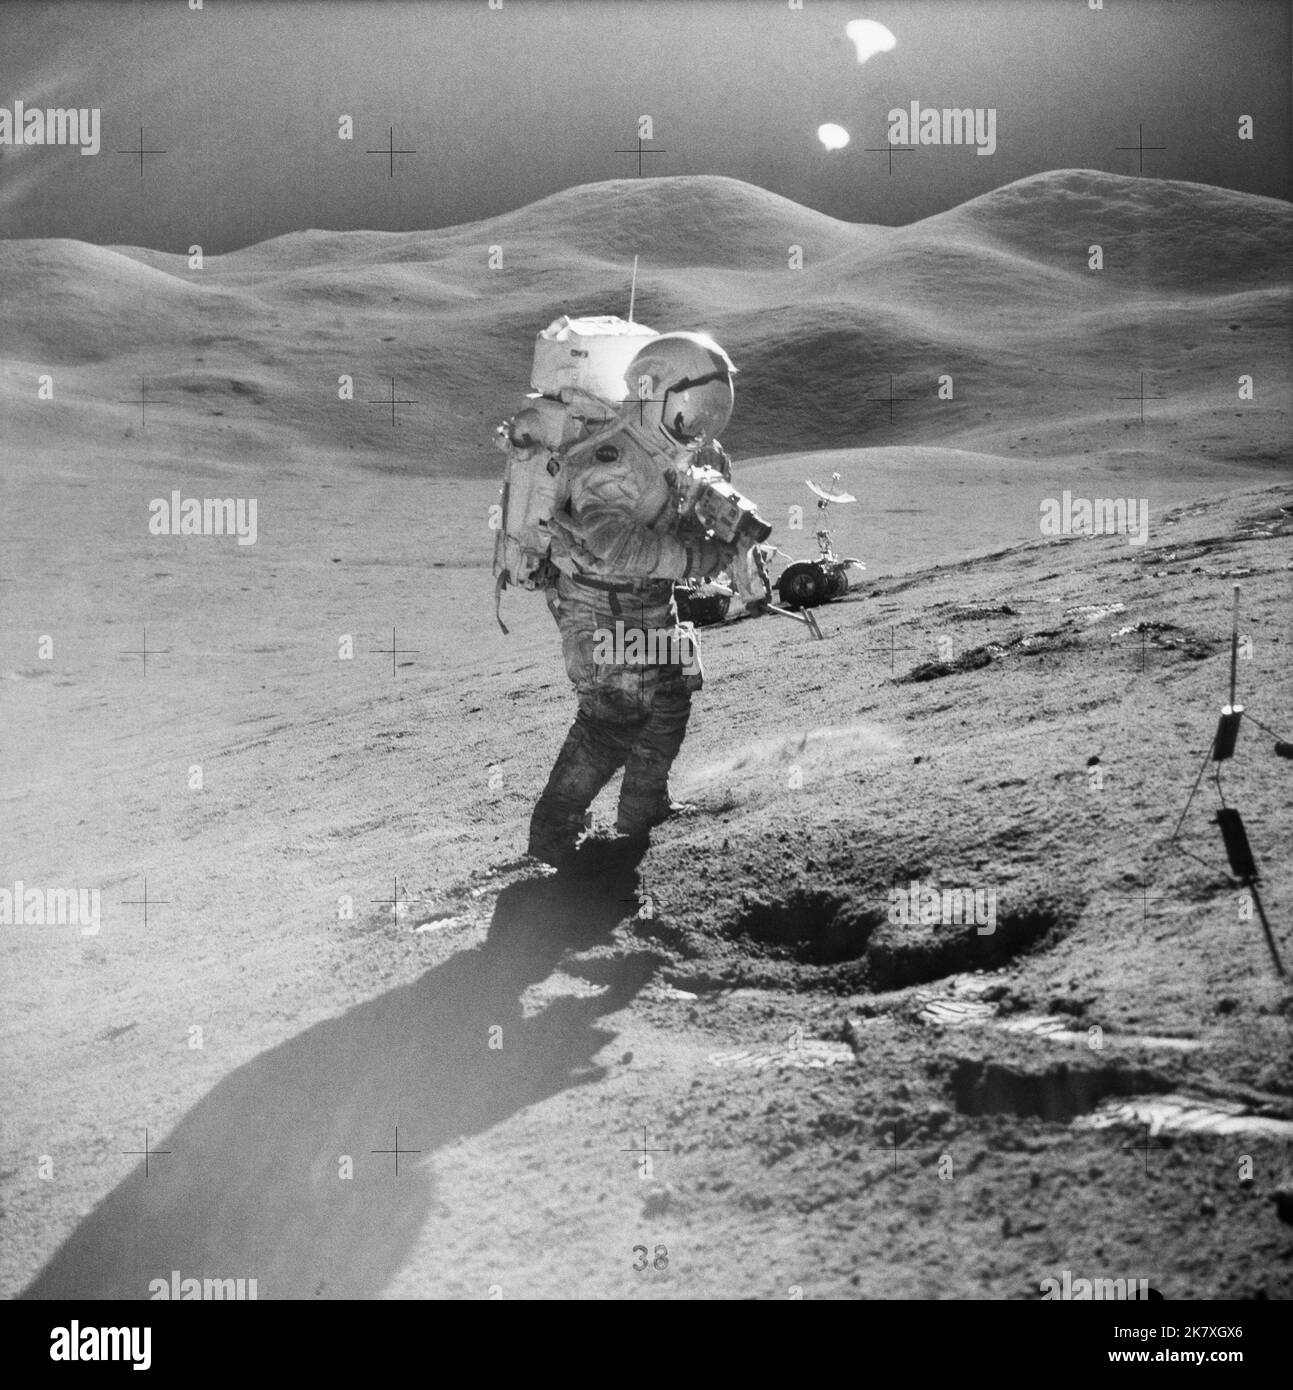 Astronaut David R. Scott, commander, standing on the slope of Hadley Delta, uses a 70mm camera during Apollo 15 extravehicular activity (EVA) on the lunar surface, July 31, 1971. He is 10.5 miles (or 17.5 kilometers) from the base of the Apennine Mountains seen in the background. Scott carries tongs in his left hand. The Lunar Roving Vehicle (LRV) is in the background. Stock Photo